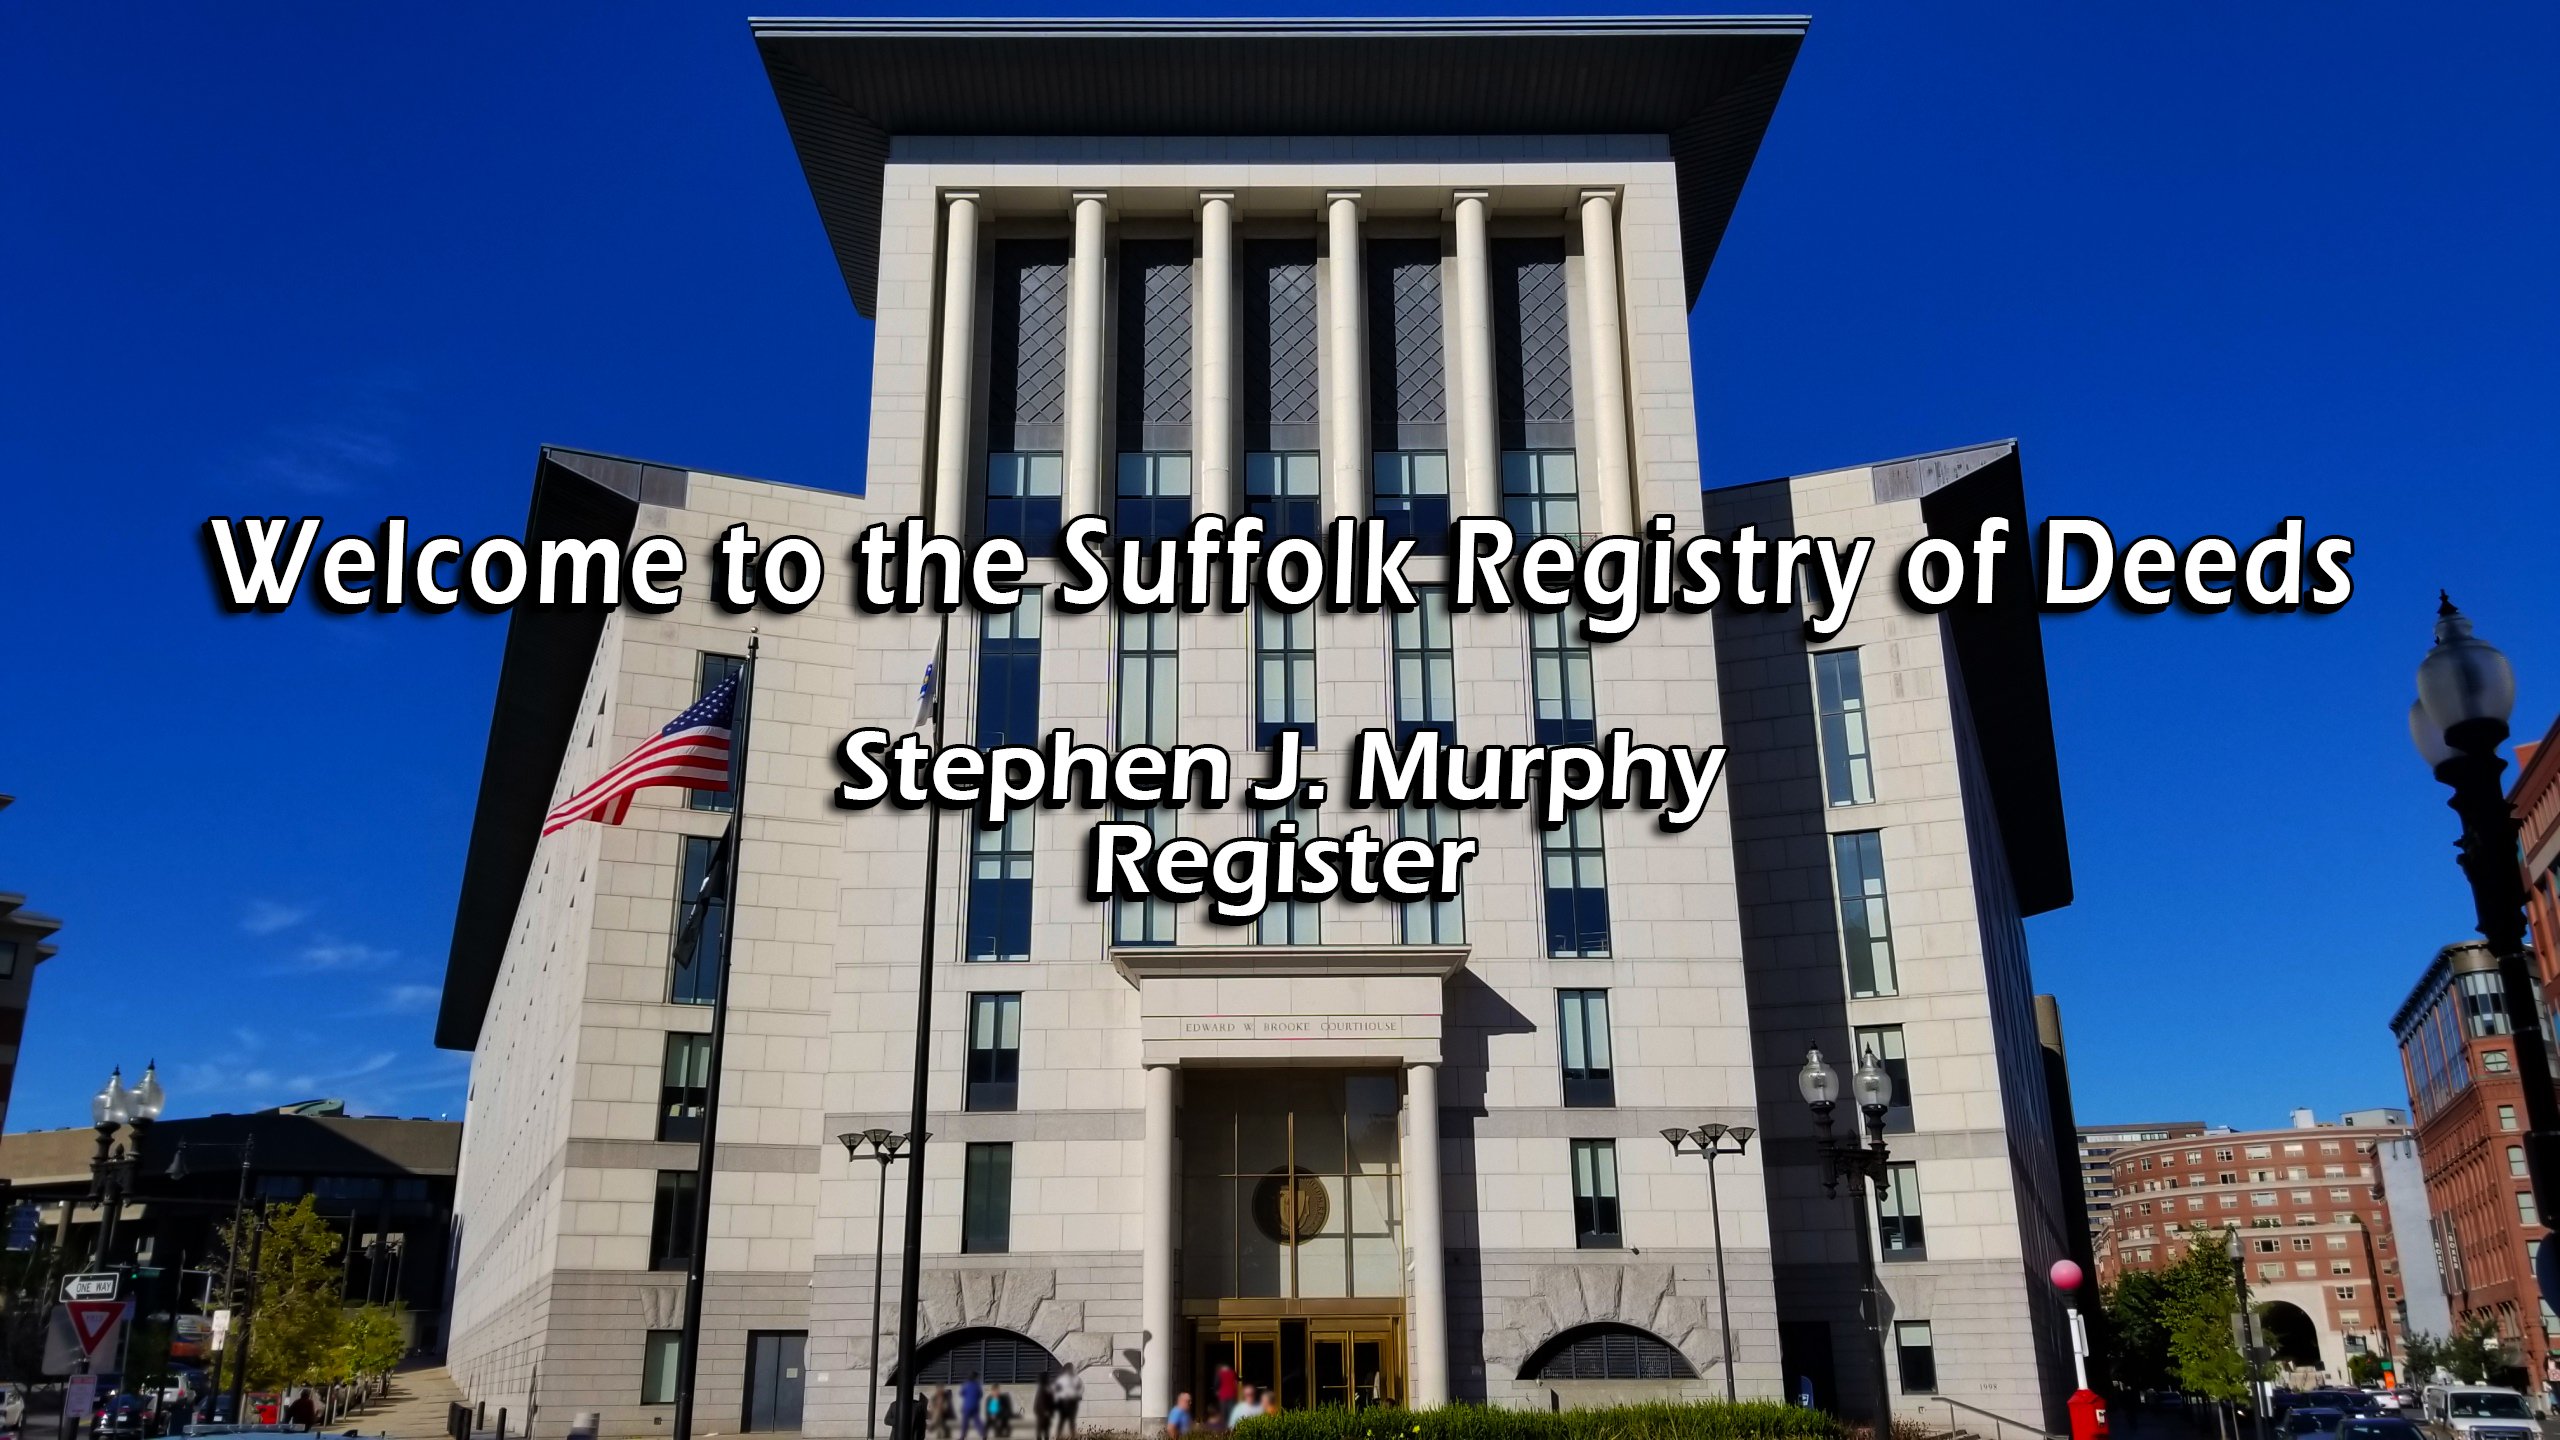 Edward W. Brooke Courthouse - Welcome to the Suffolk Registry of Deeds